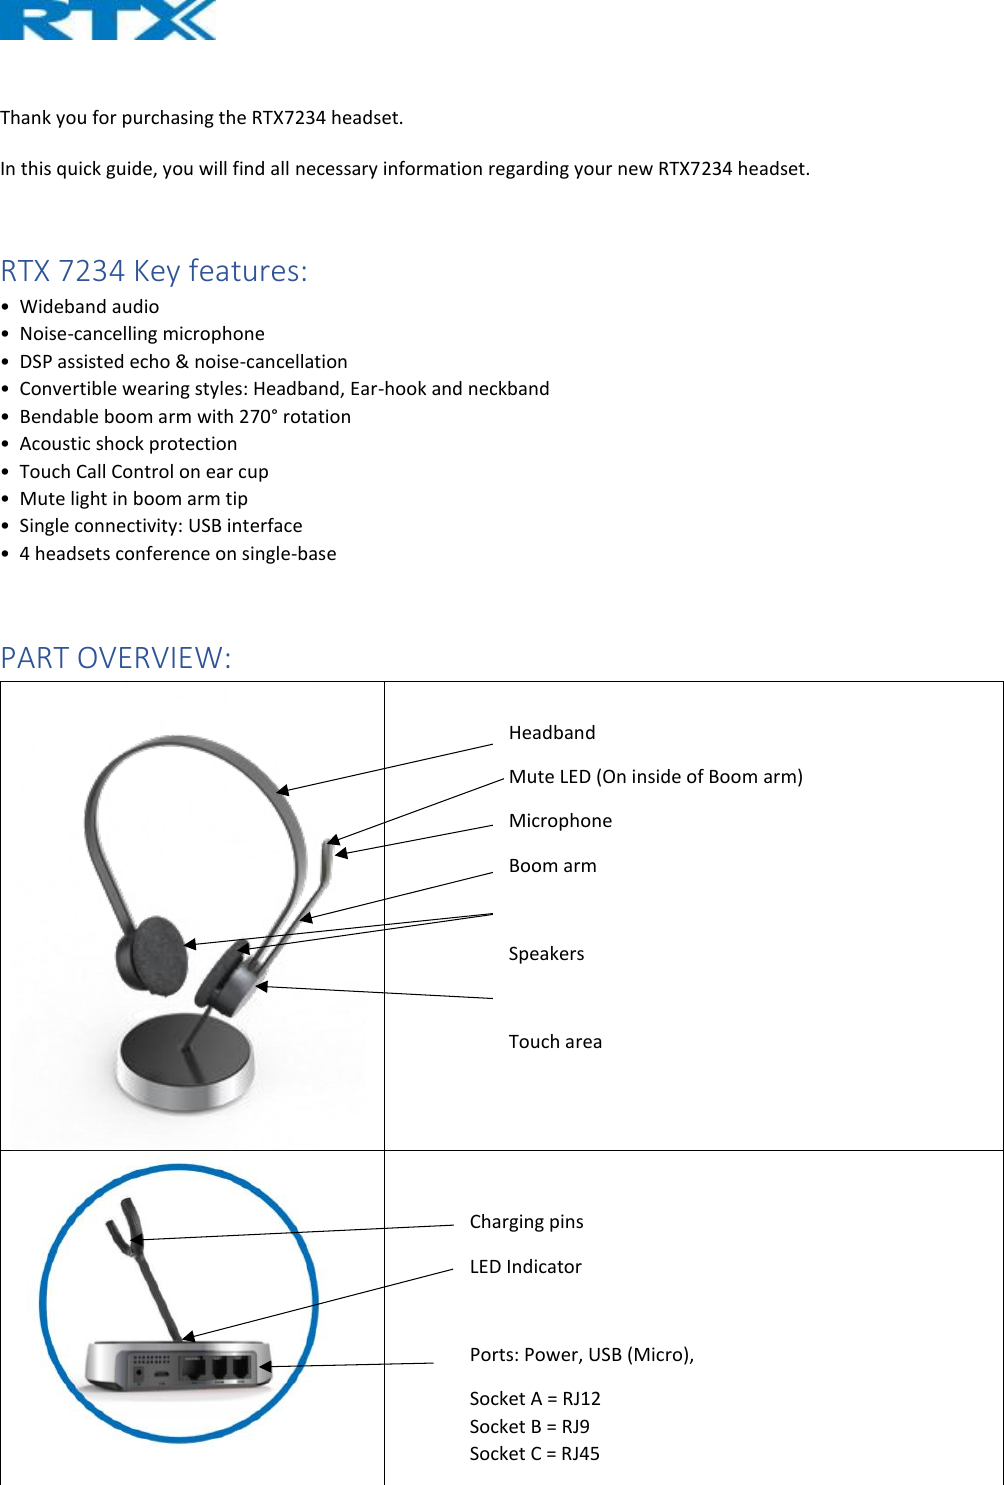   Thank you for purchasing the RTX7234 headset.   In this quick guide, you will find all necessary information regarding your new RTX7234 headset.   RTX 7234 Key features: •  Wideband audio  •  Noise-cancelling microphone  •  DSP assisted echo &amp; noise-cancellation  •  Convertible wearing styles: Headband, Ear-hook and neckband  •  Bendable boom arm with 270° rotation  •  Acoustic shock protection  •  Touch Call Control on ear cup  •  Mute light in boom arm tip  •  Single connectivity: USB interface  •  4 headsets conference on single-base  PART OVERVIEW:     Charging pins LED Indicator  Ports: Power, USB (Micro),  Socket A = RJ12  Socket B = RJ9 Socket C = RJ45 Headband Mute LED (On inside of Boom arm) Microphone Boom arm  Speakers  Touch area 